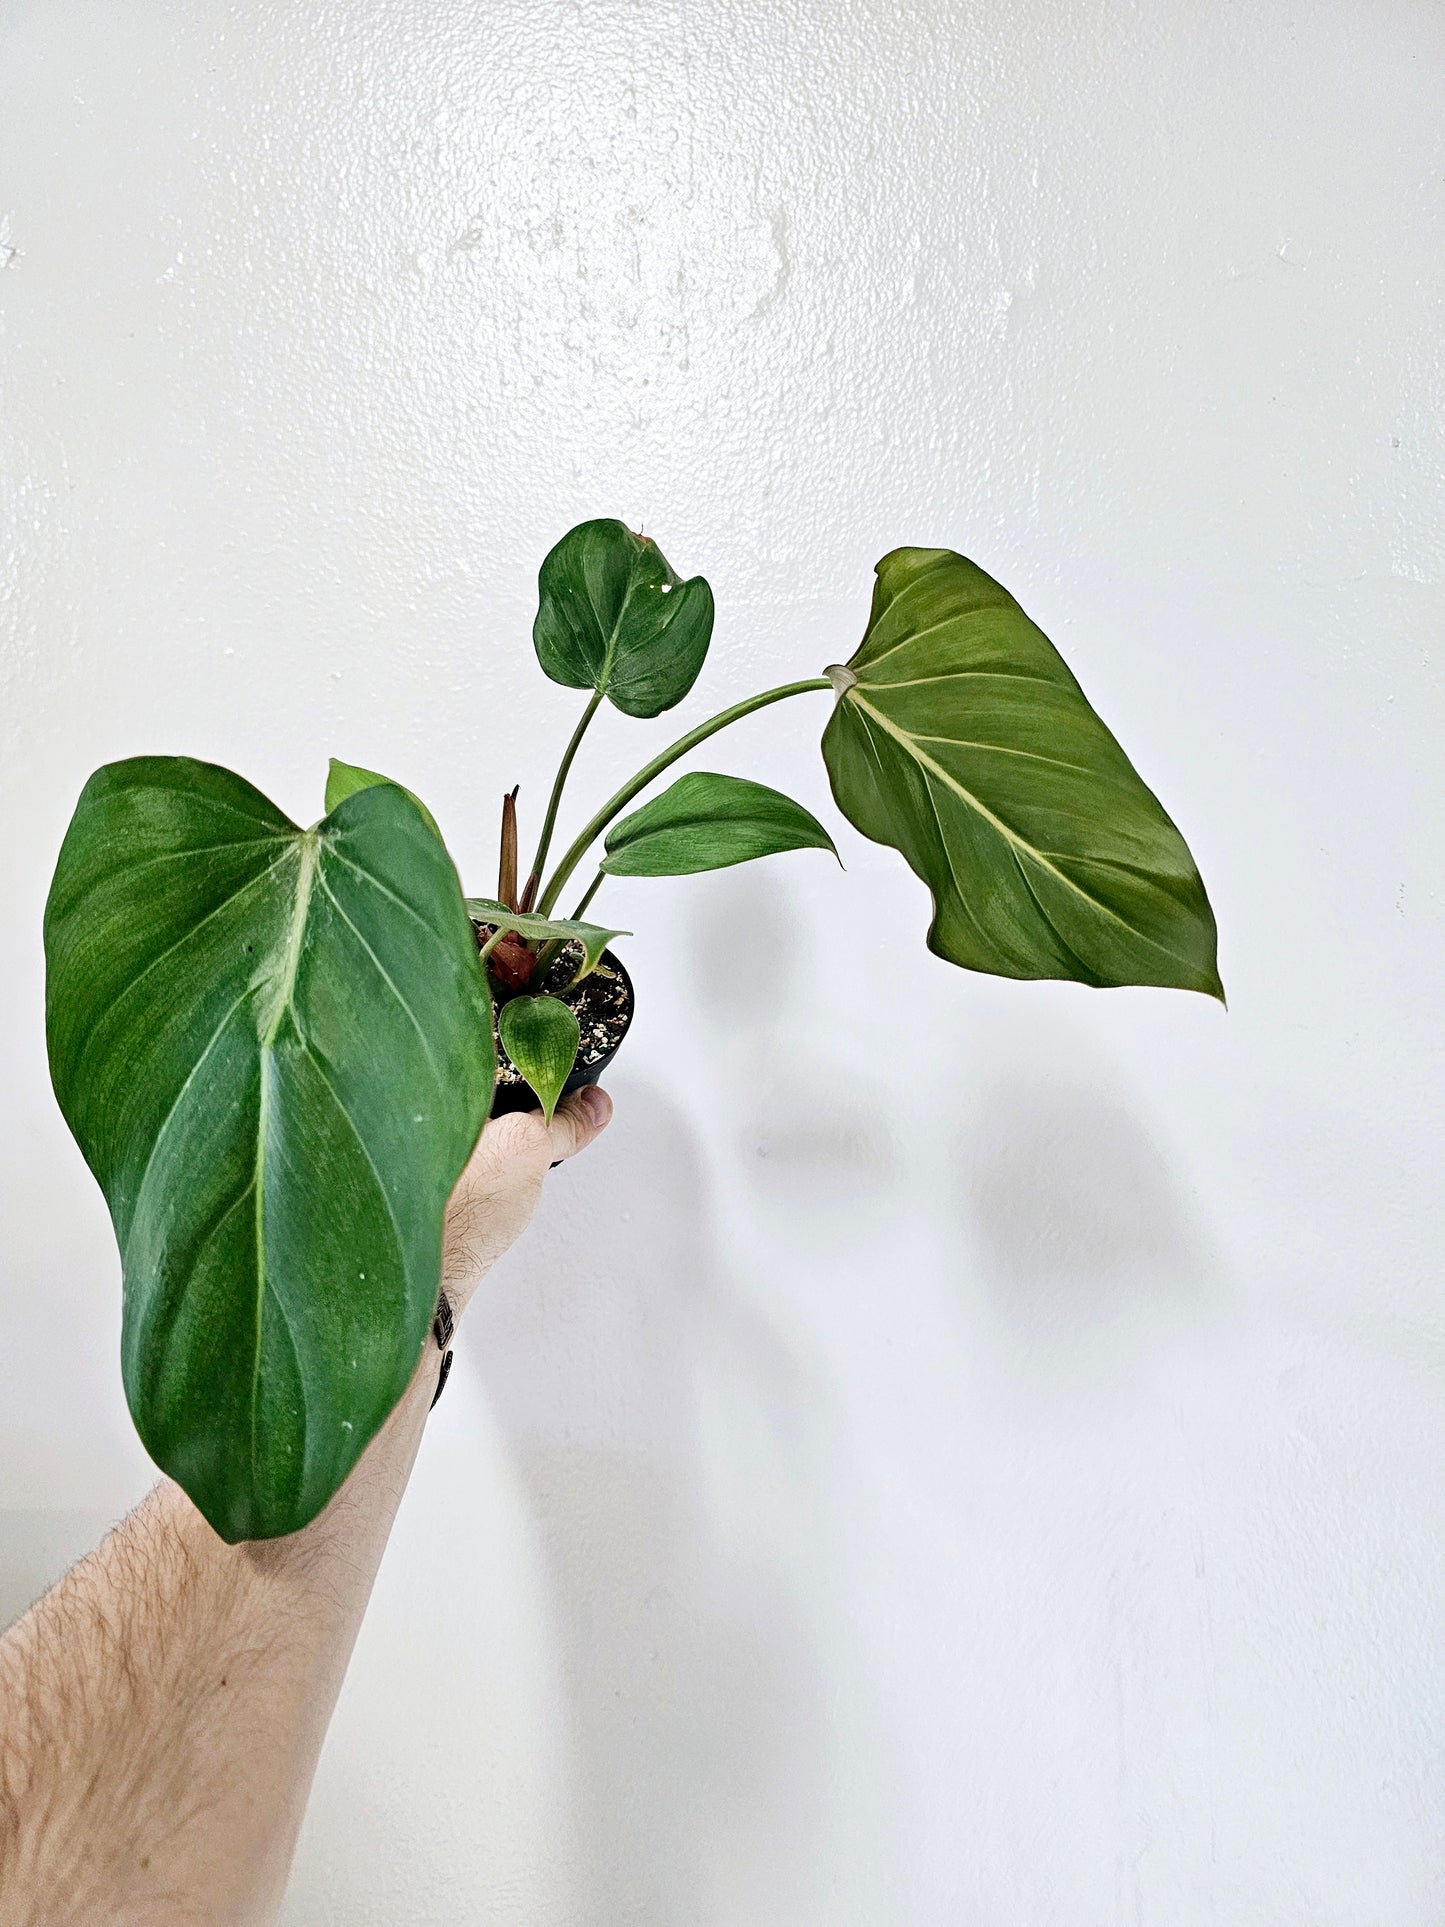 Philodendron Summer Glory 4"